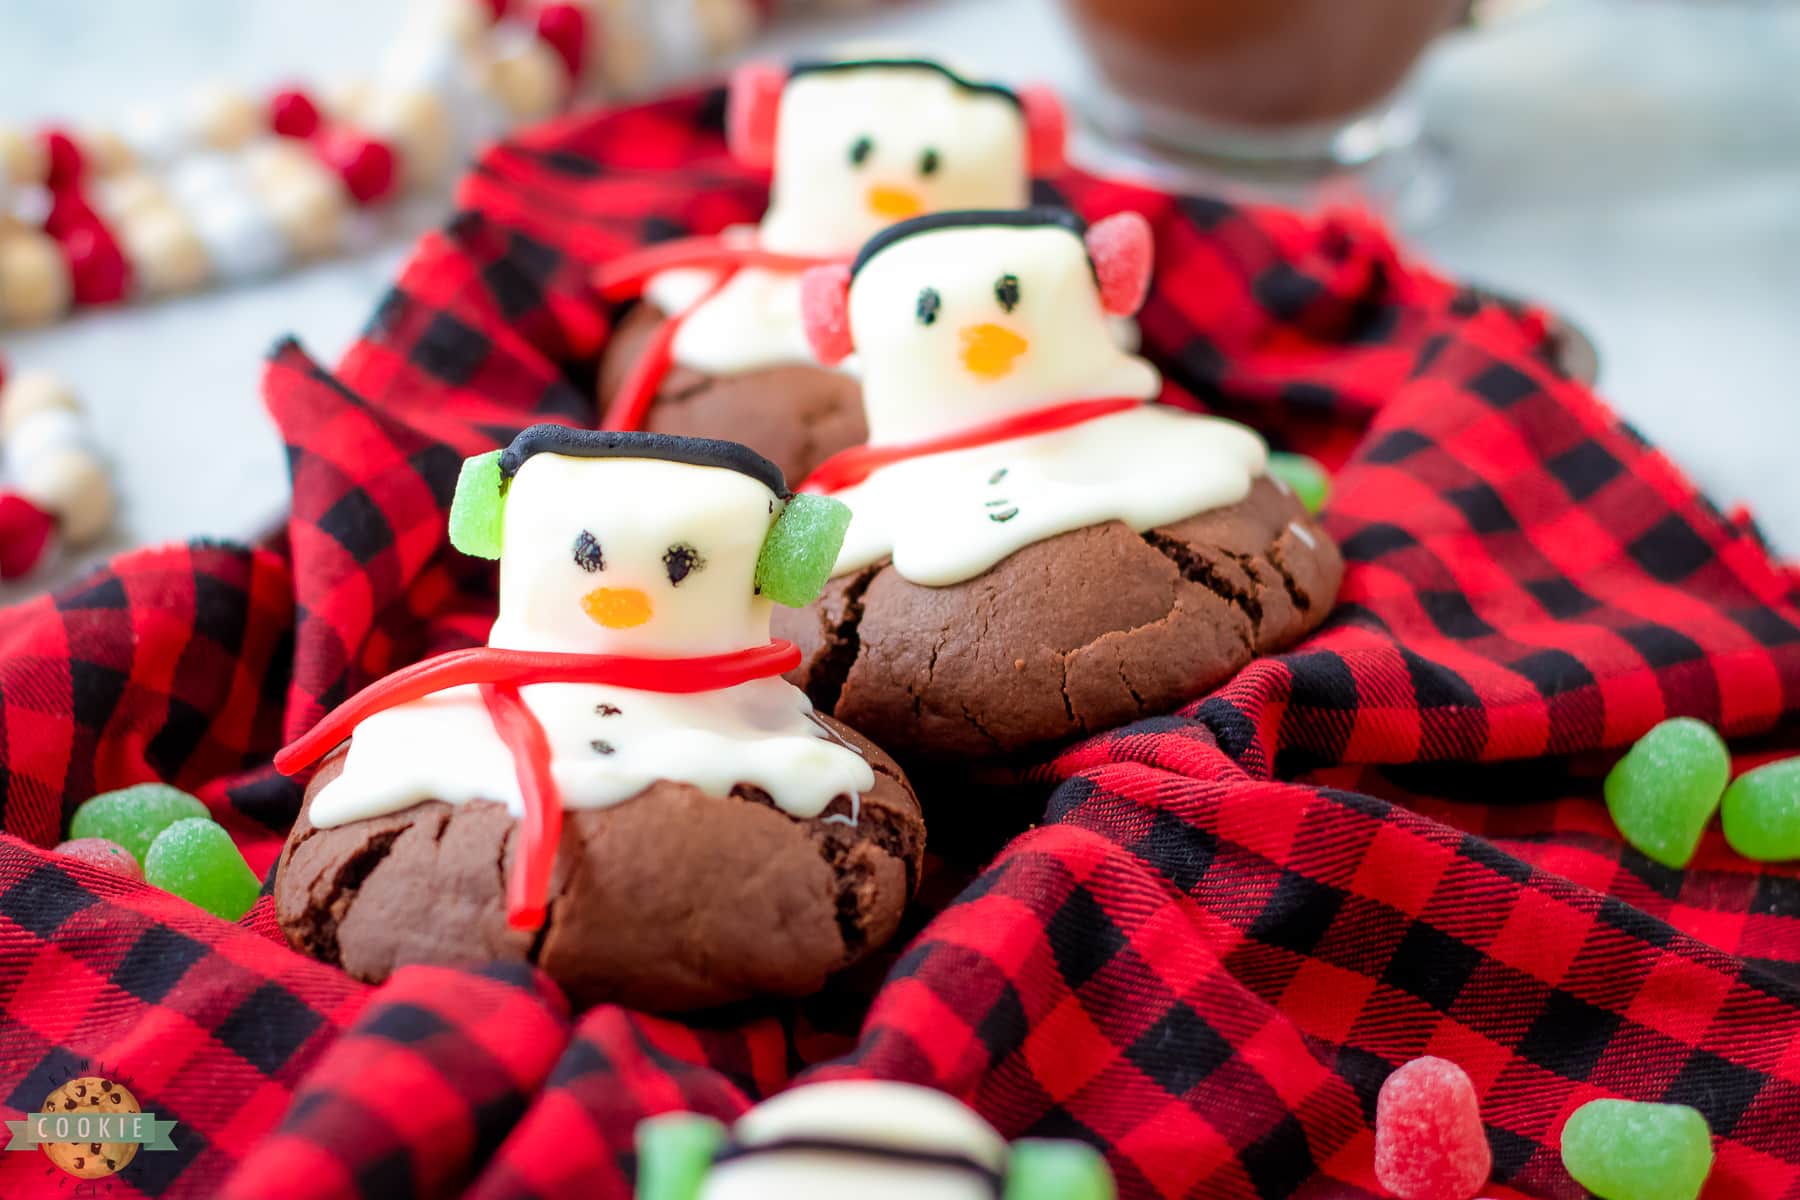 bakery style snowman cookies on a red checked cloth